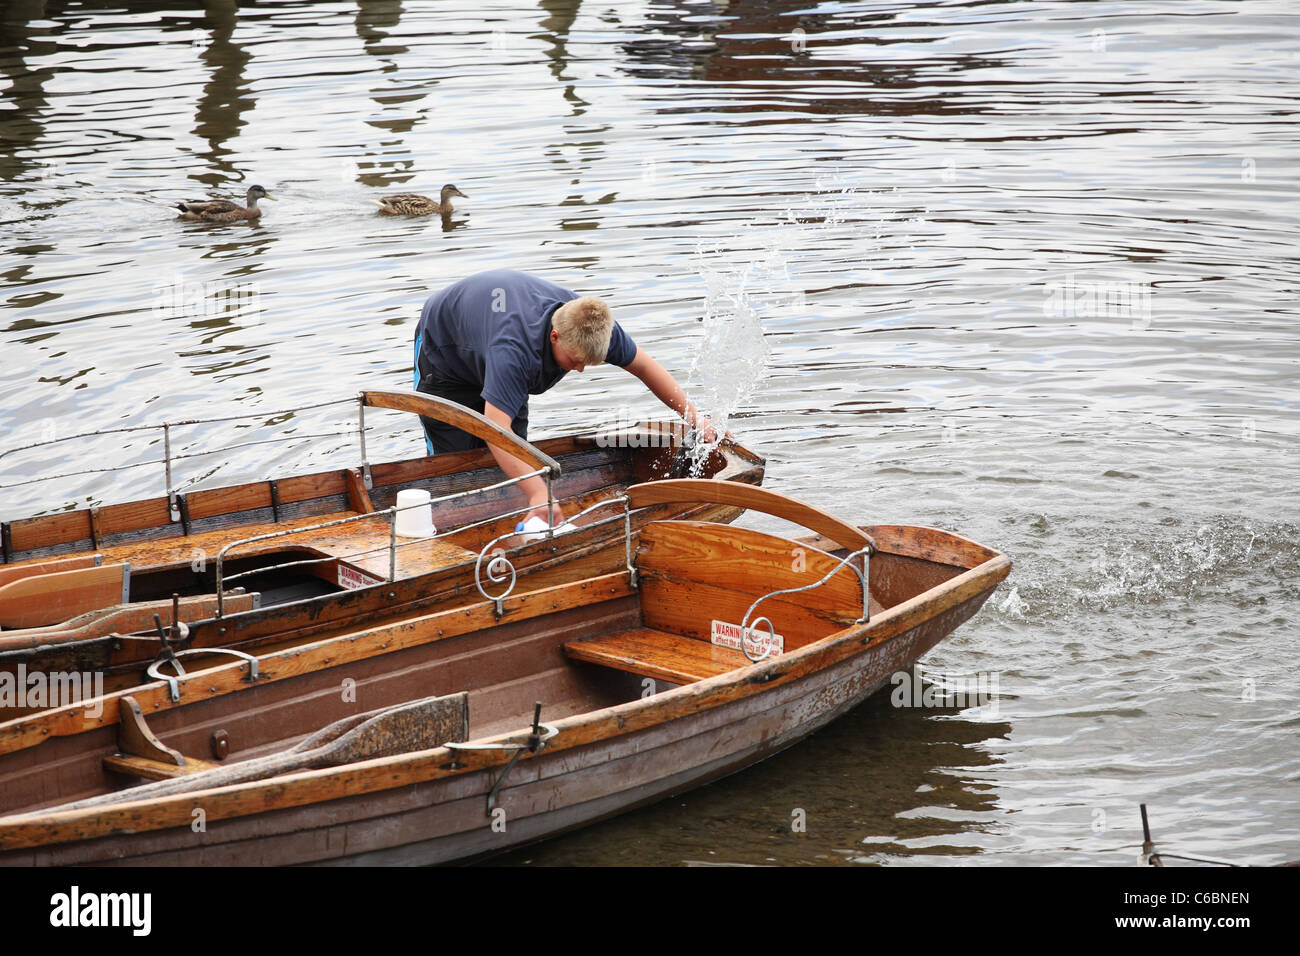 Young man bailing water out of rowing boat, Derwent water, Keswick, Cumbria, North West England, UK Stock Photo